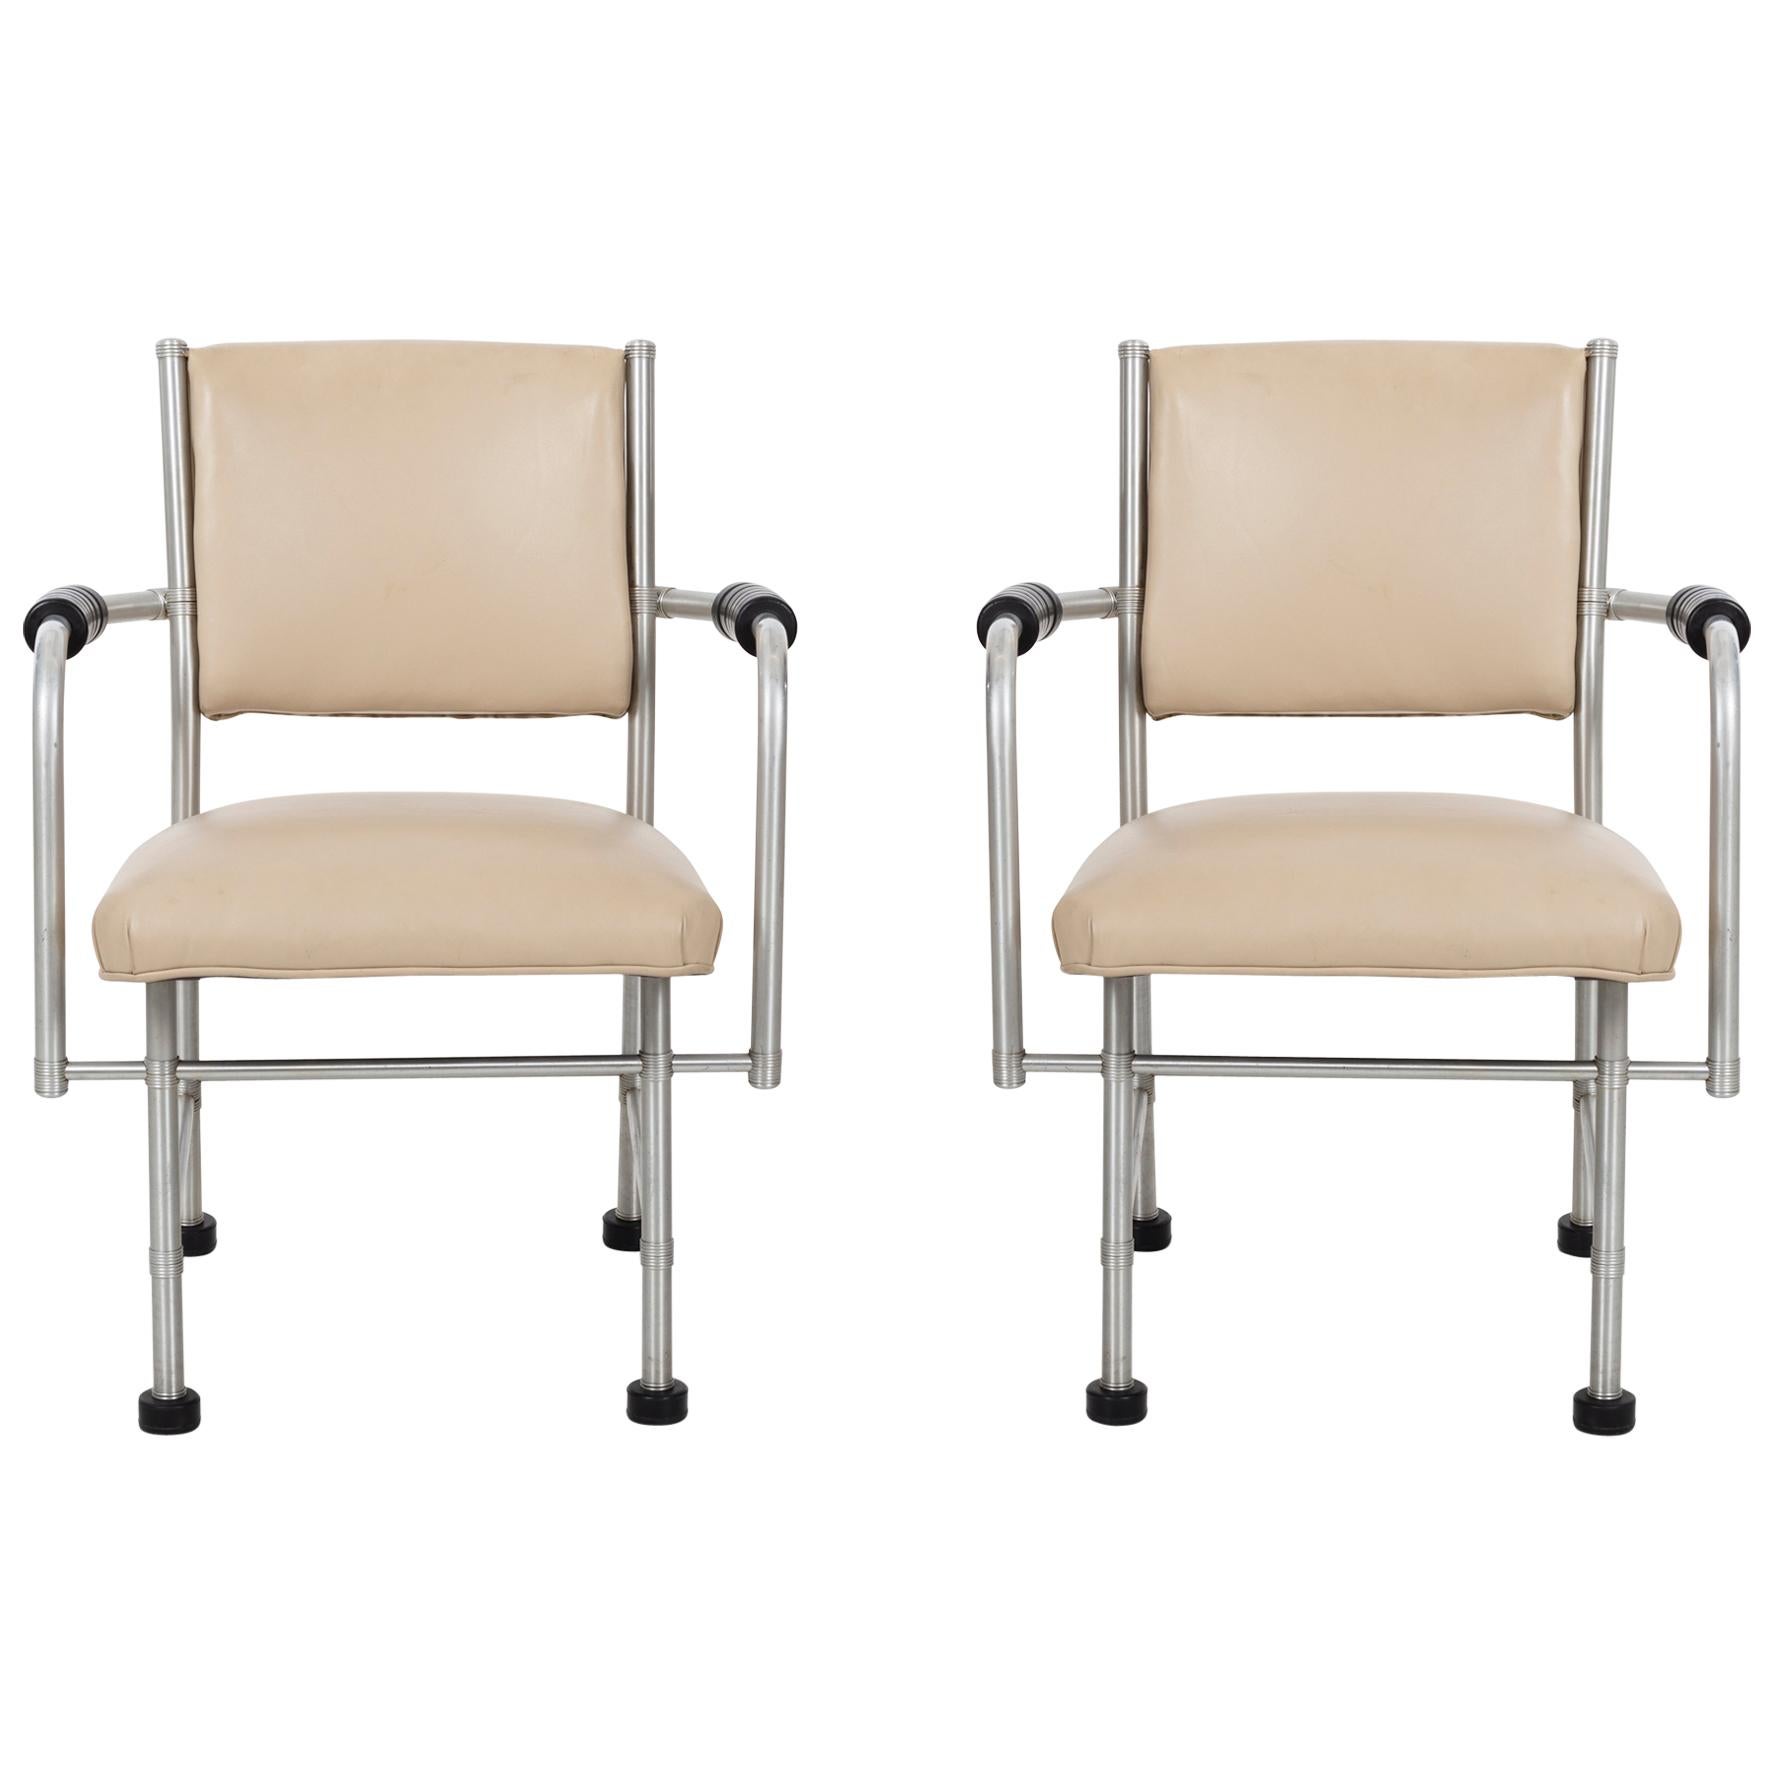 Warren McArthur Pair of Chairs a Revision of The Sardi's Chair